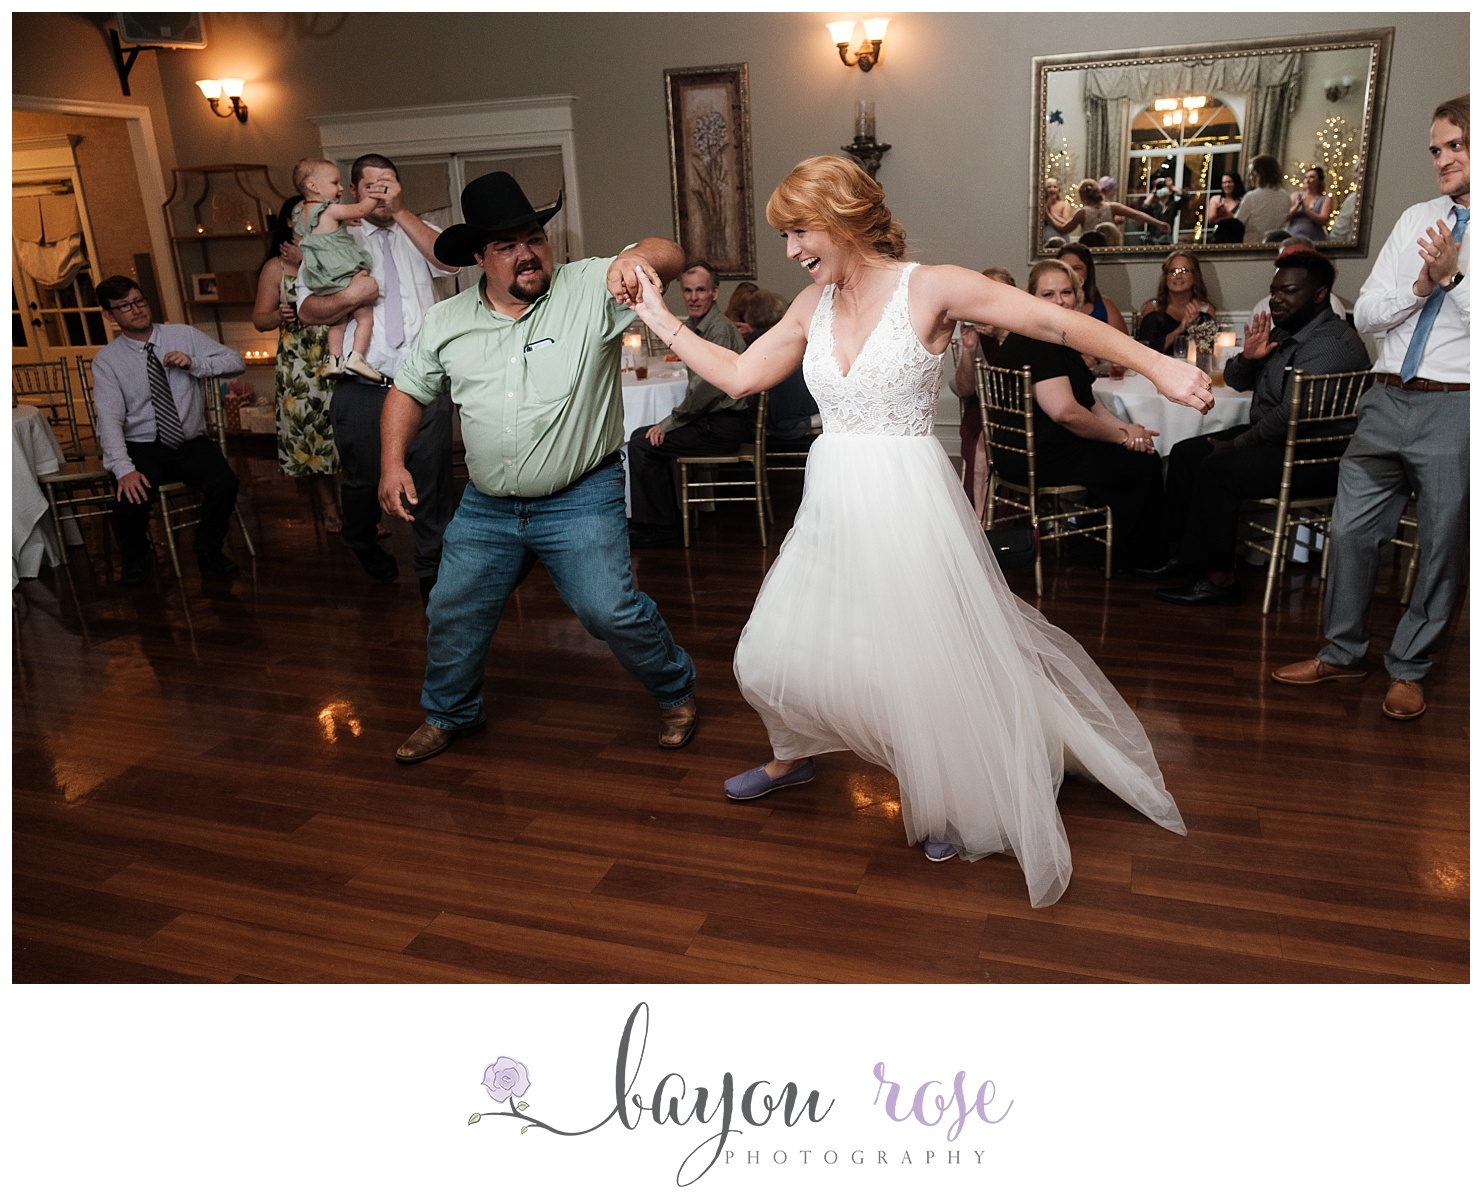 Bride is whirled around the dance floor during wedding reception